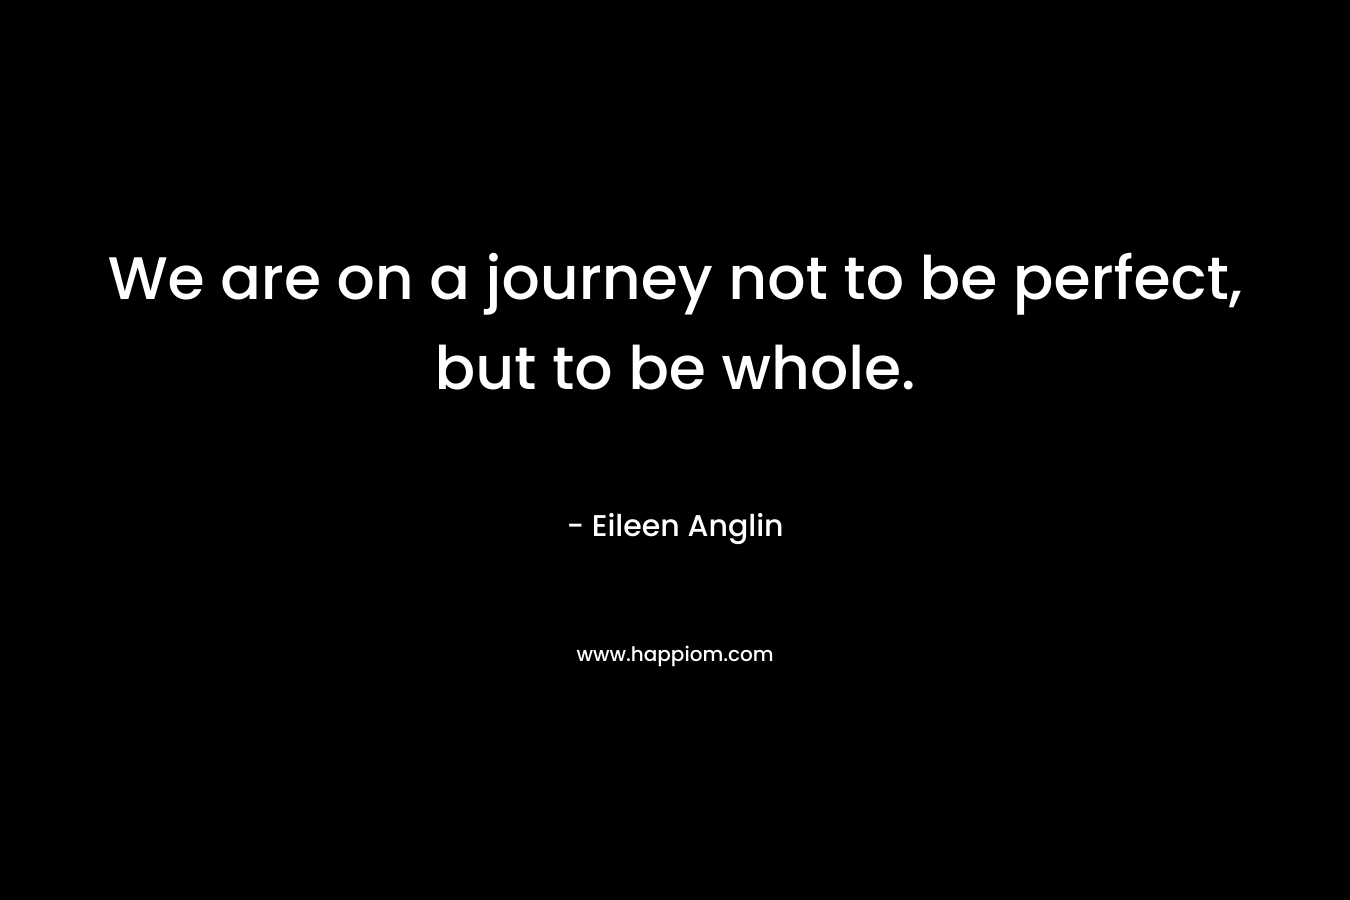 We are on a journey not to be perfect, but to be whole. – Eileen Anglin